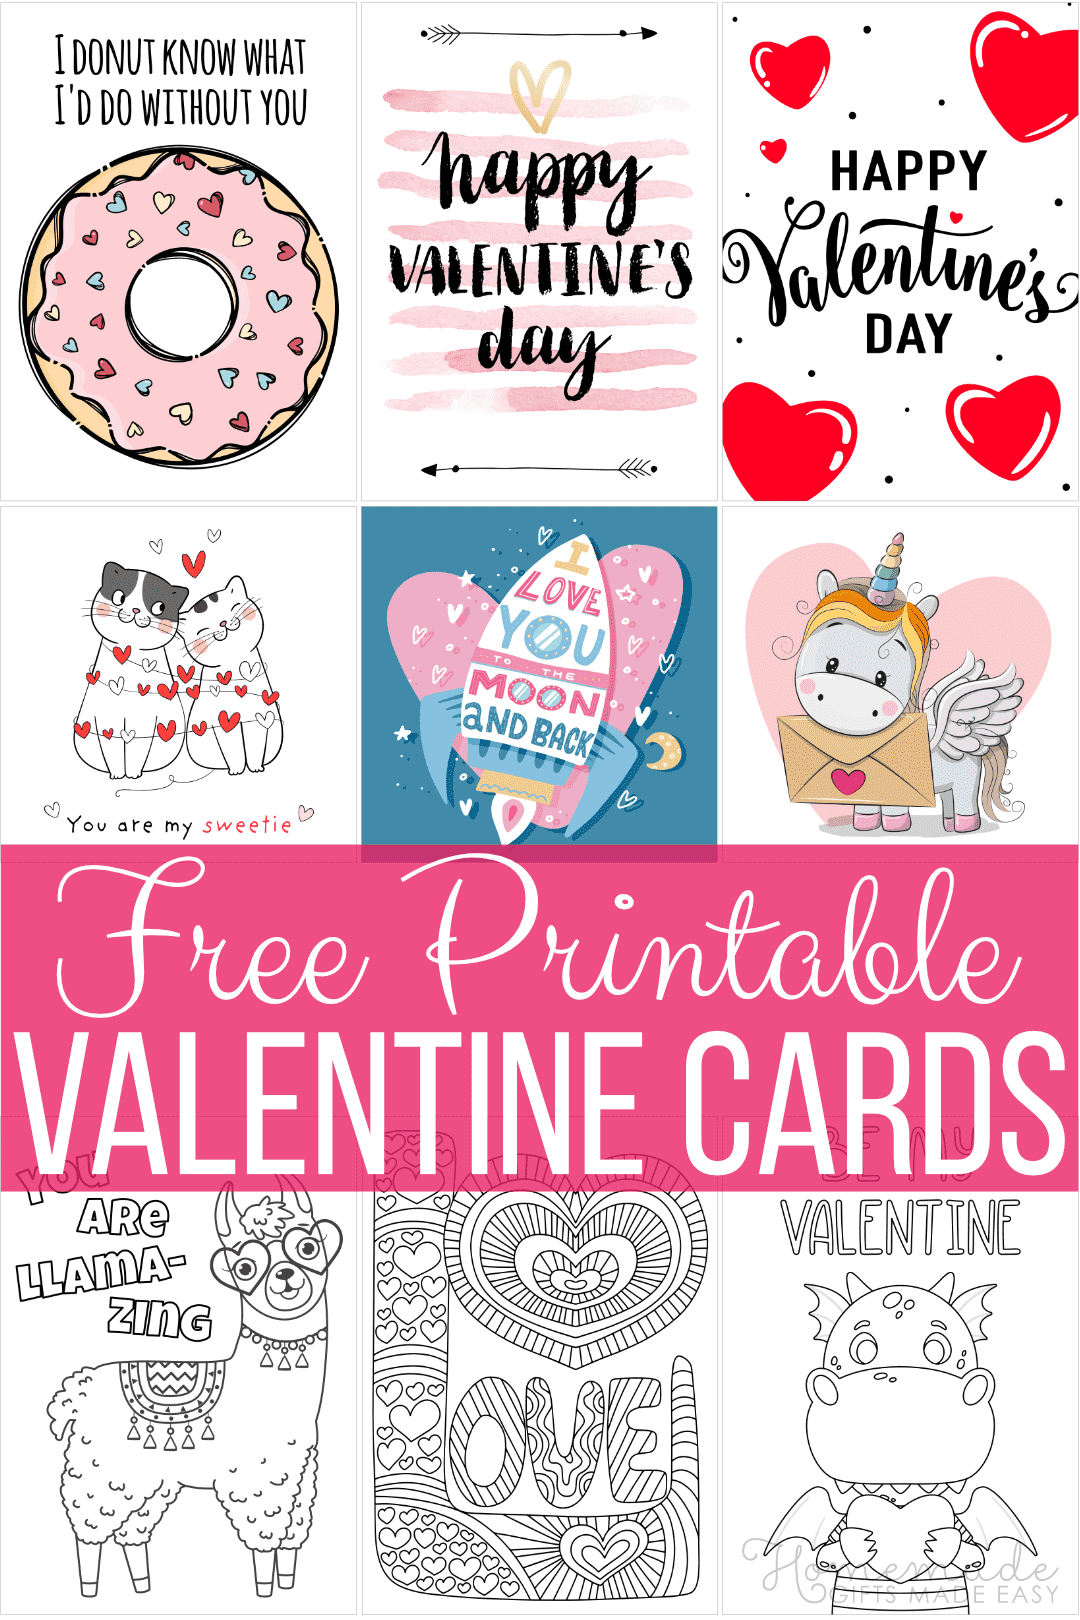 Valentines day printout cards